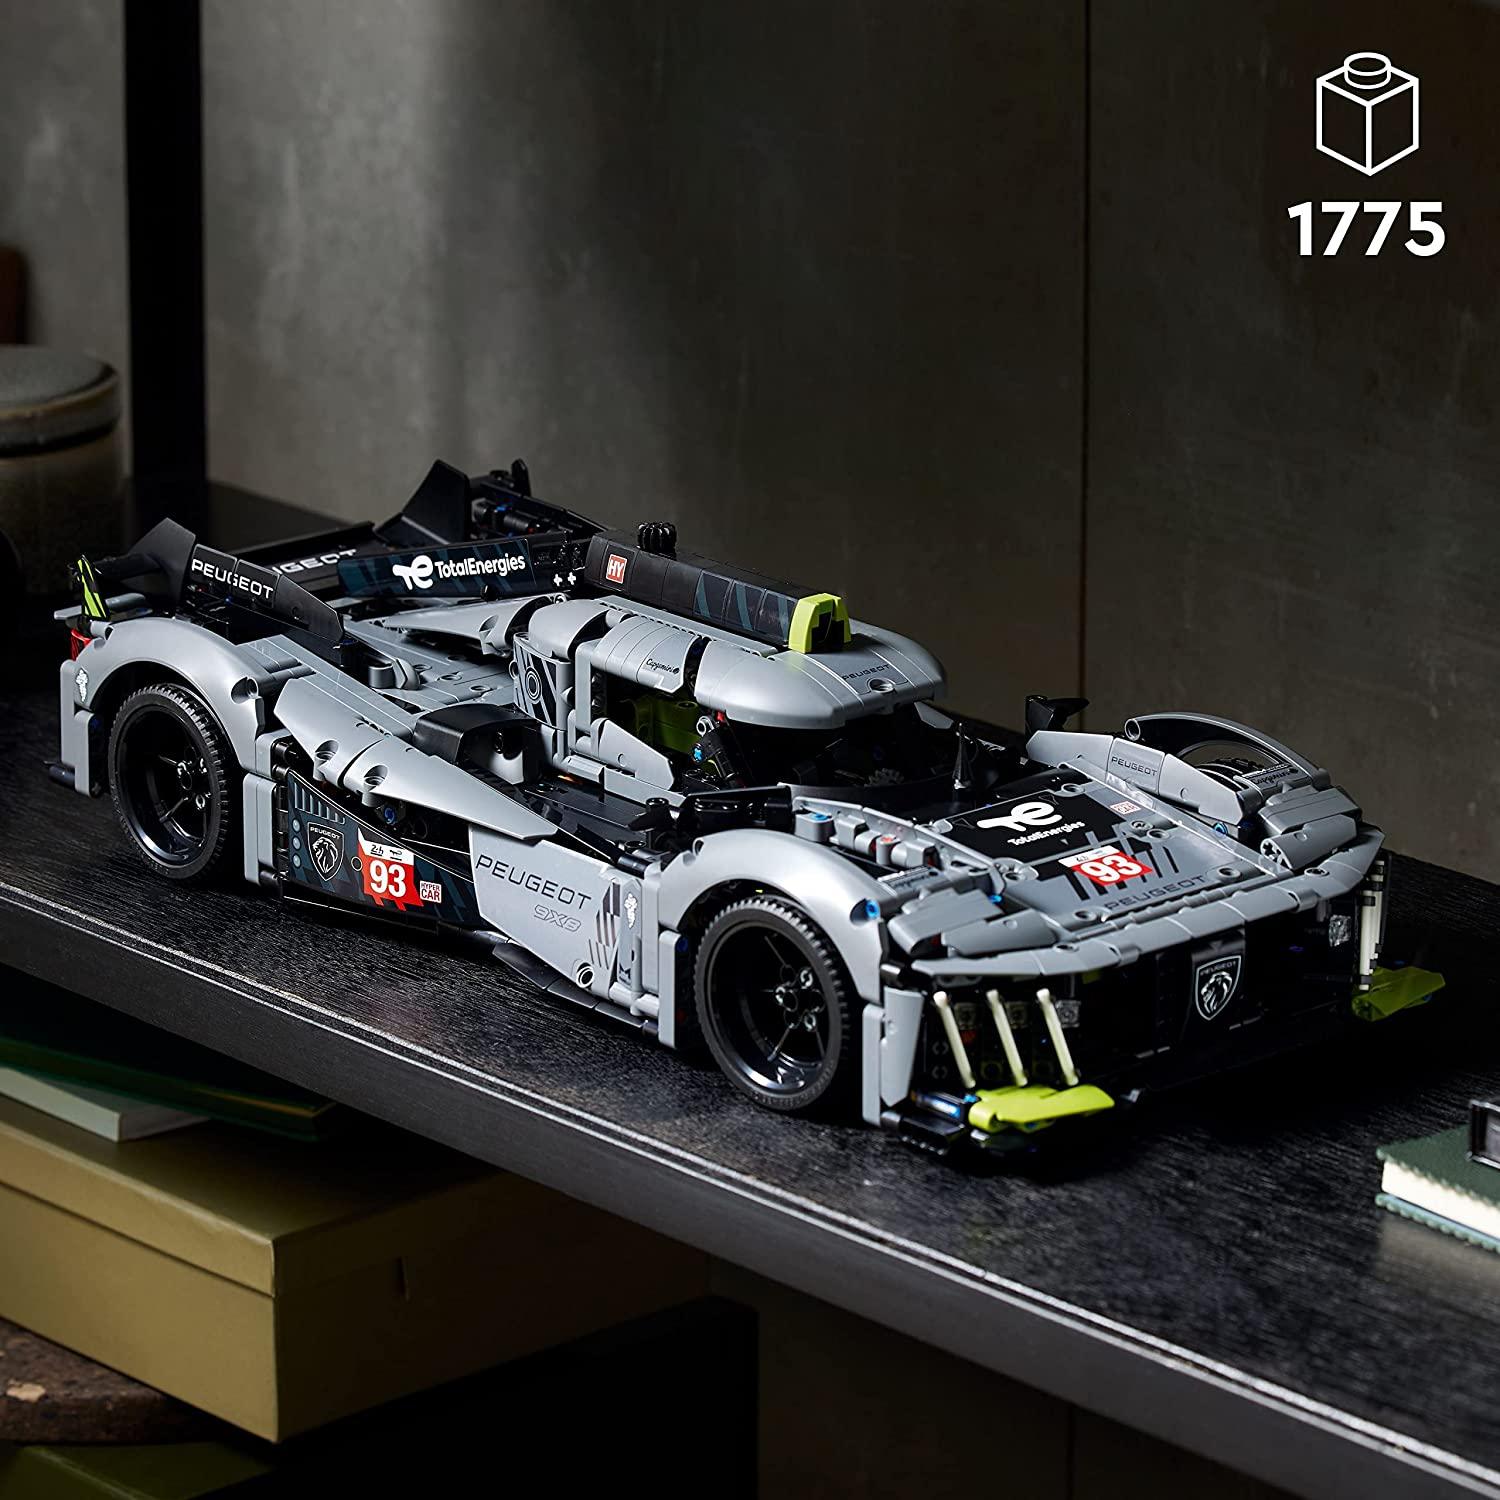 LEGO Technic Peugeot 9X8 24H Le Mans Hybrid Hypercar 42156 Collectible Race Car Building Kit for Adults and Teens, 1:10 Scale Racing Car Model - BumbleToys - 18+, 5-7 Years, Boys, Clearance, LEGO, OXE, Pre-Order, Technic